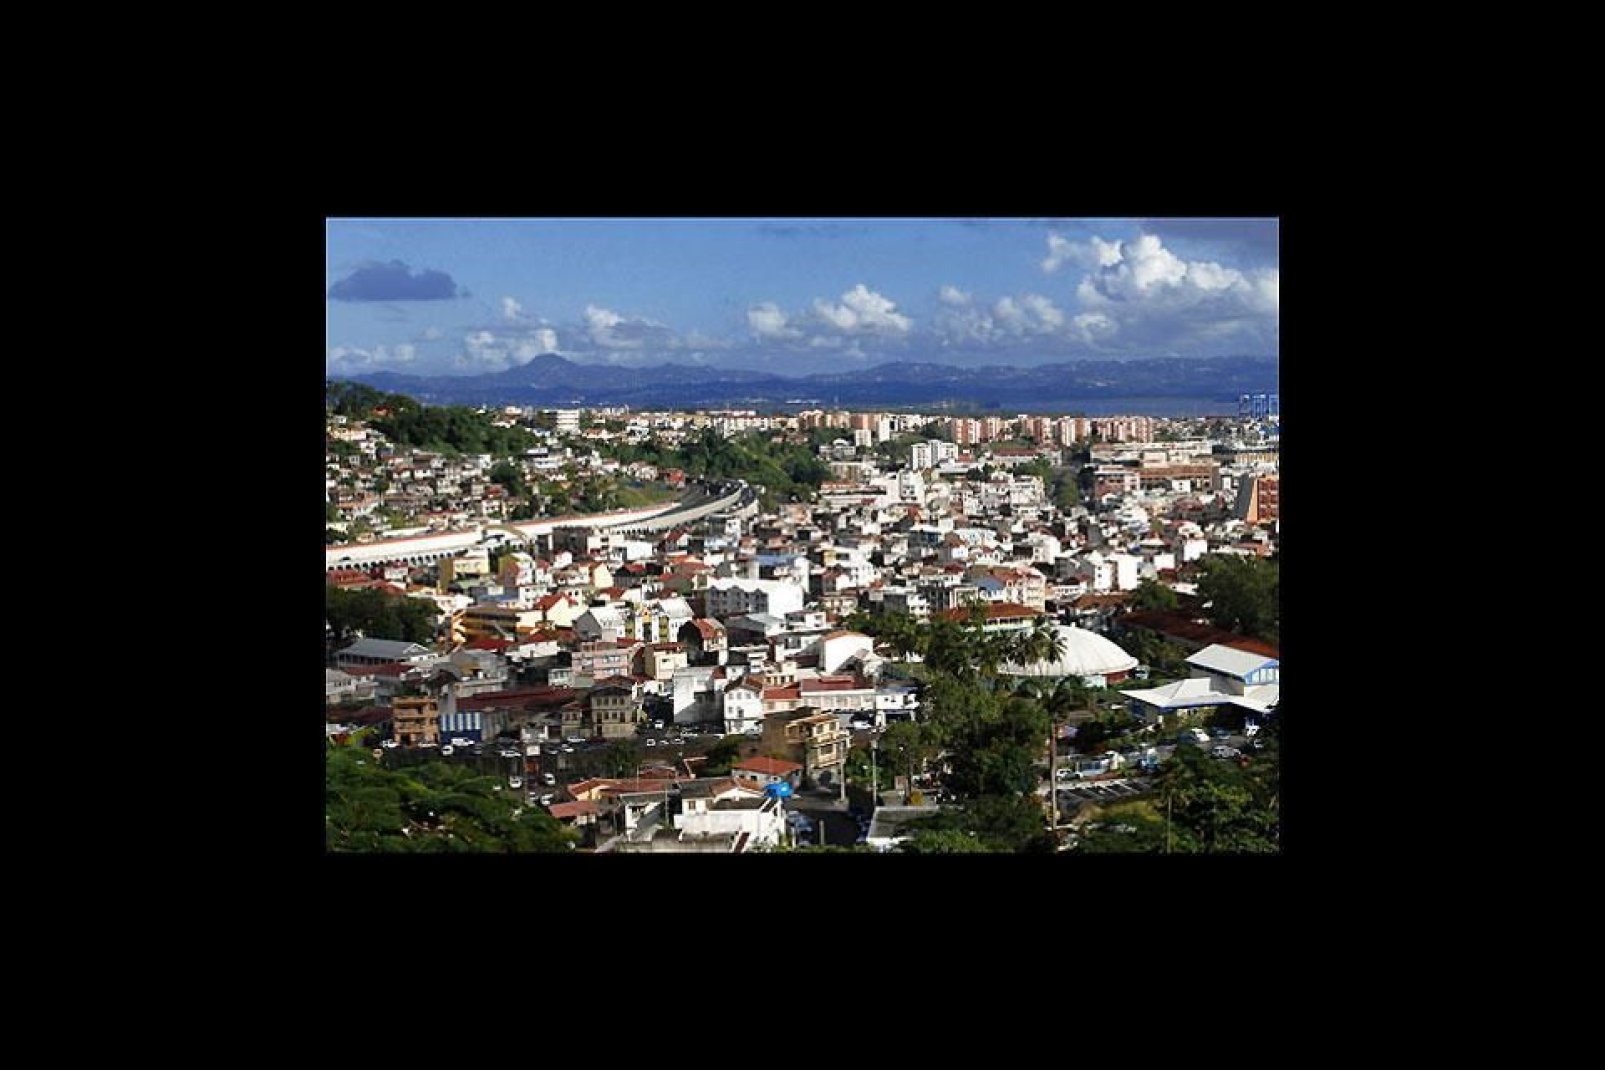 Originally named Port-Royal, Fort-de-France has only been the capital of Martinique since Saint-Pierre was destroyed in 1902.